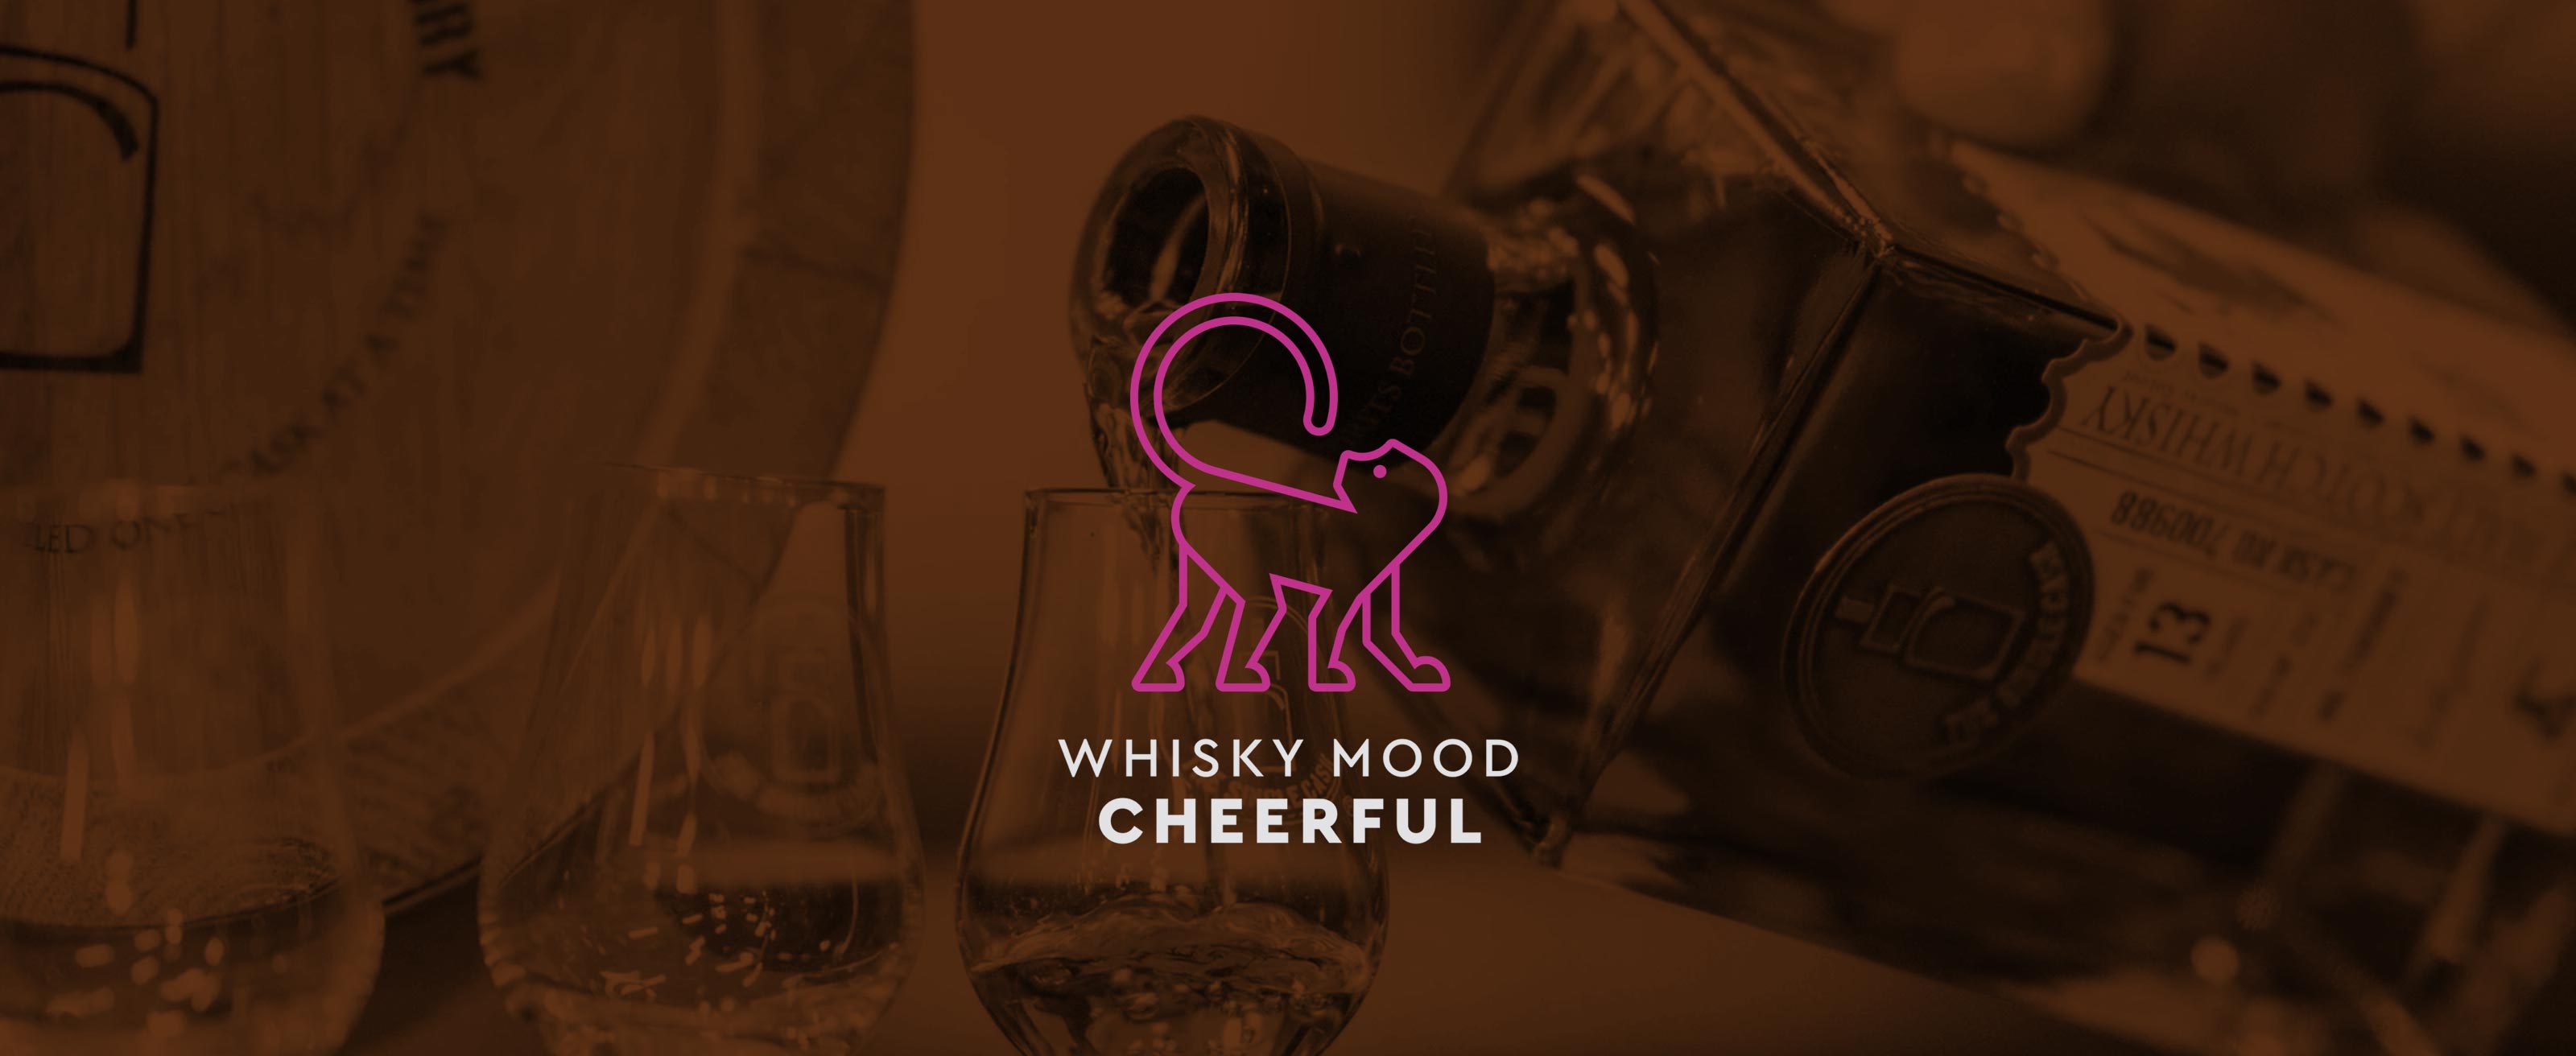 The Single Cask Whisky Moods: Cheerful Whiskies